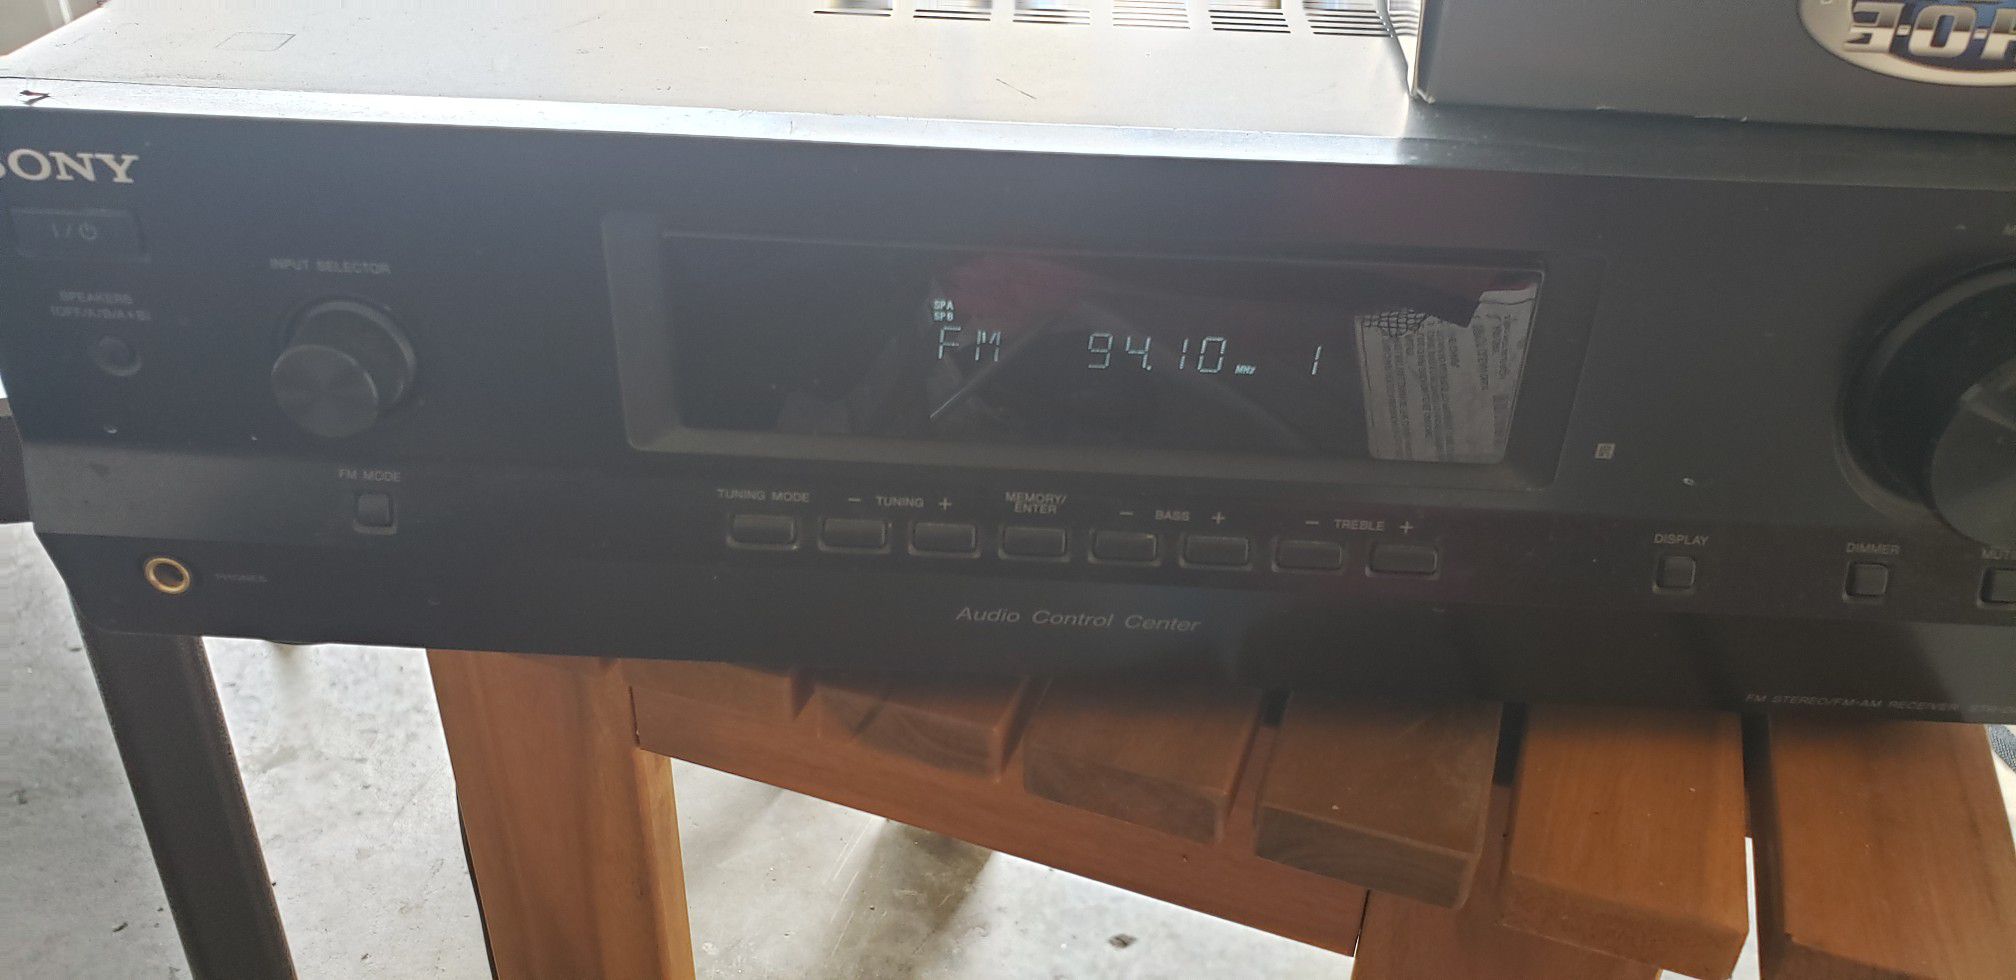 Sony AM/FM Stereo Receiver